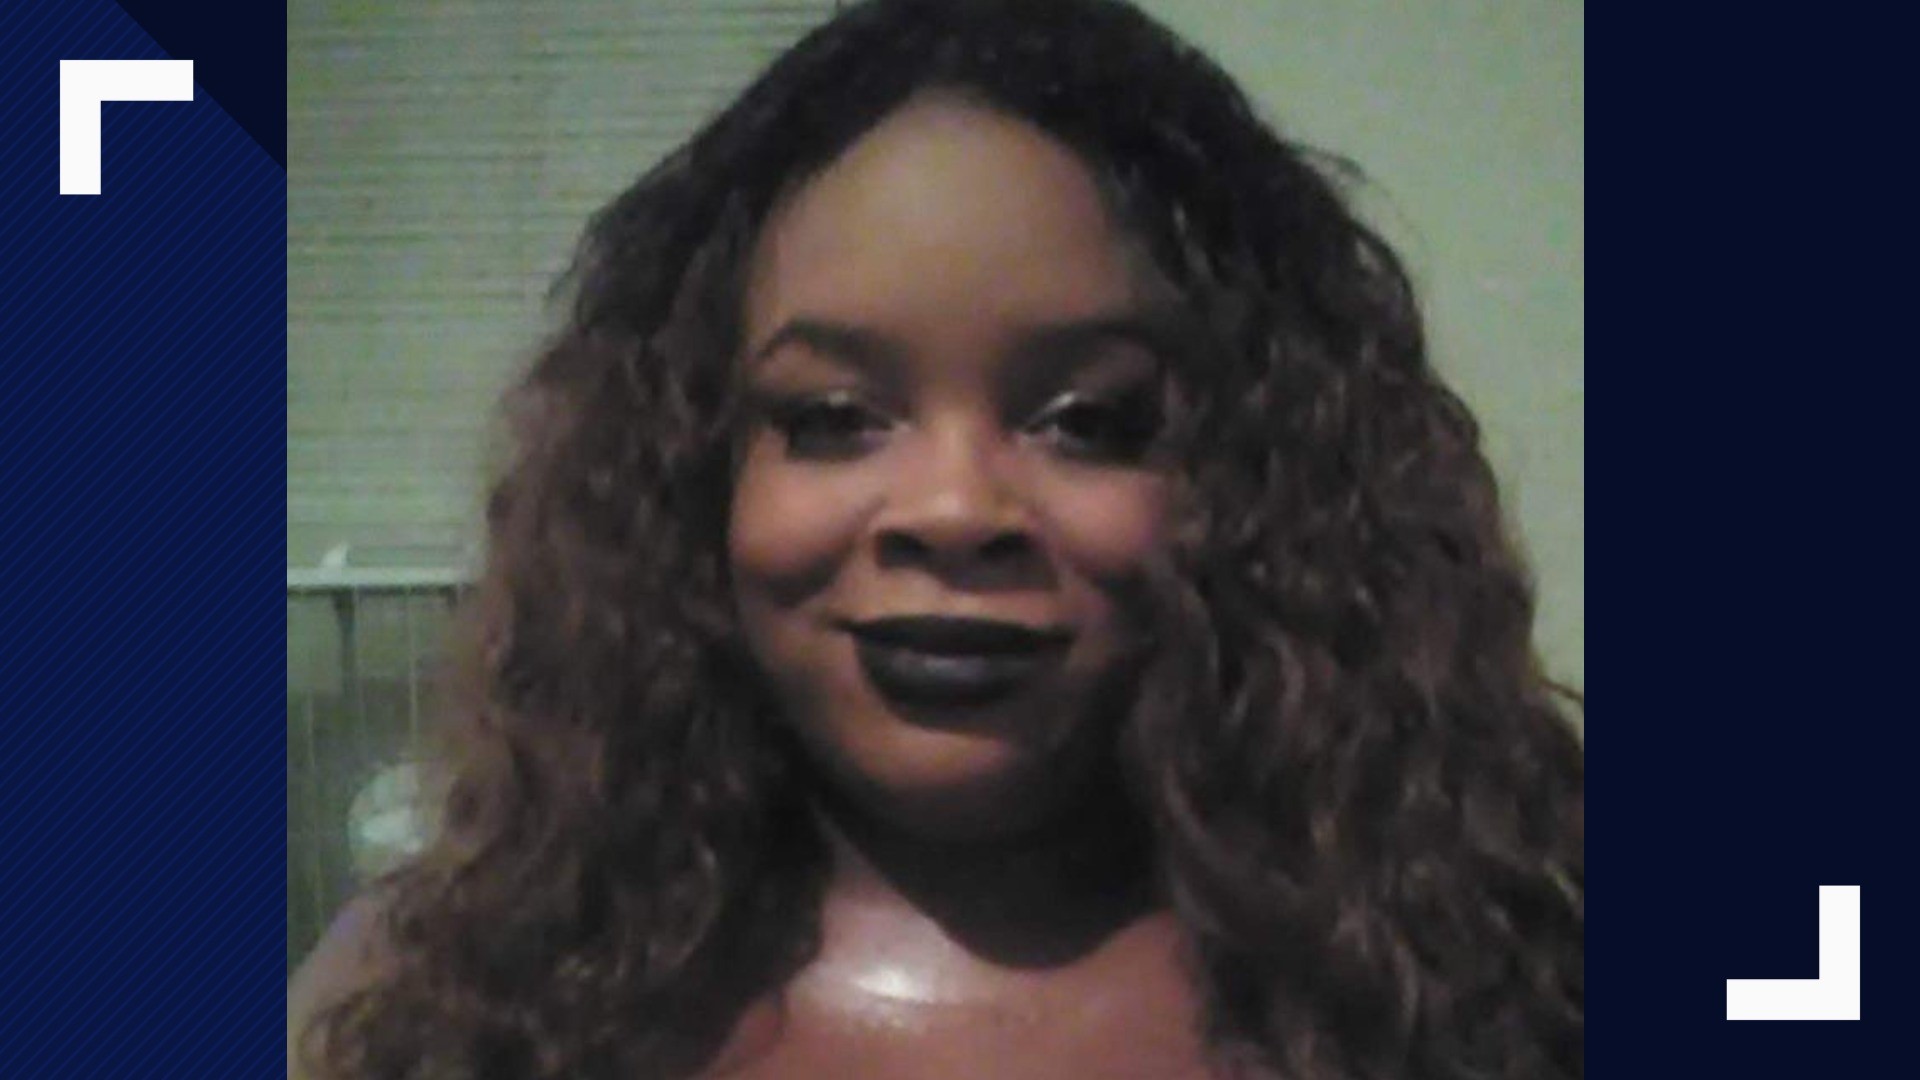 A transgender woman is dead and her devastated fiance is asking why. The murder happened early Saturday morning on Jost Street. Near the DC/Maryland line in Prince George's County.